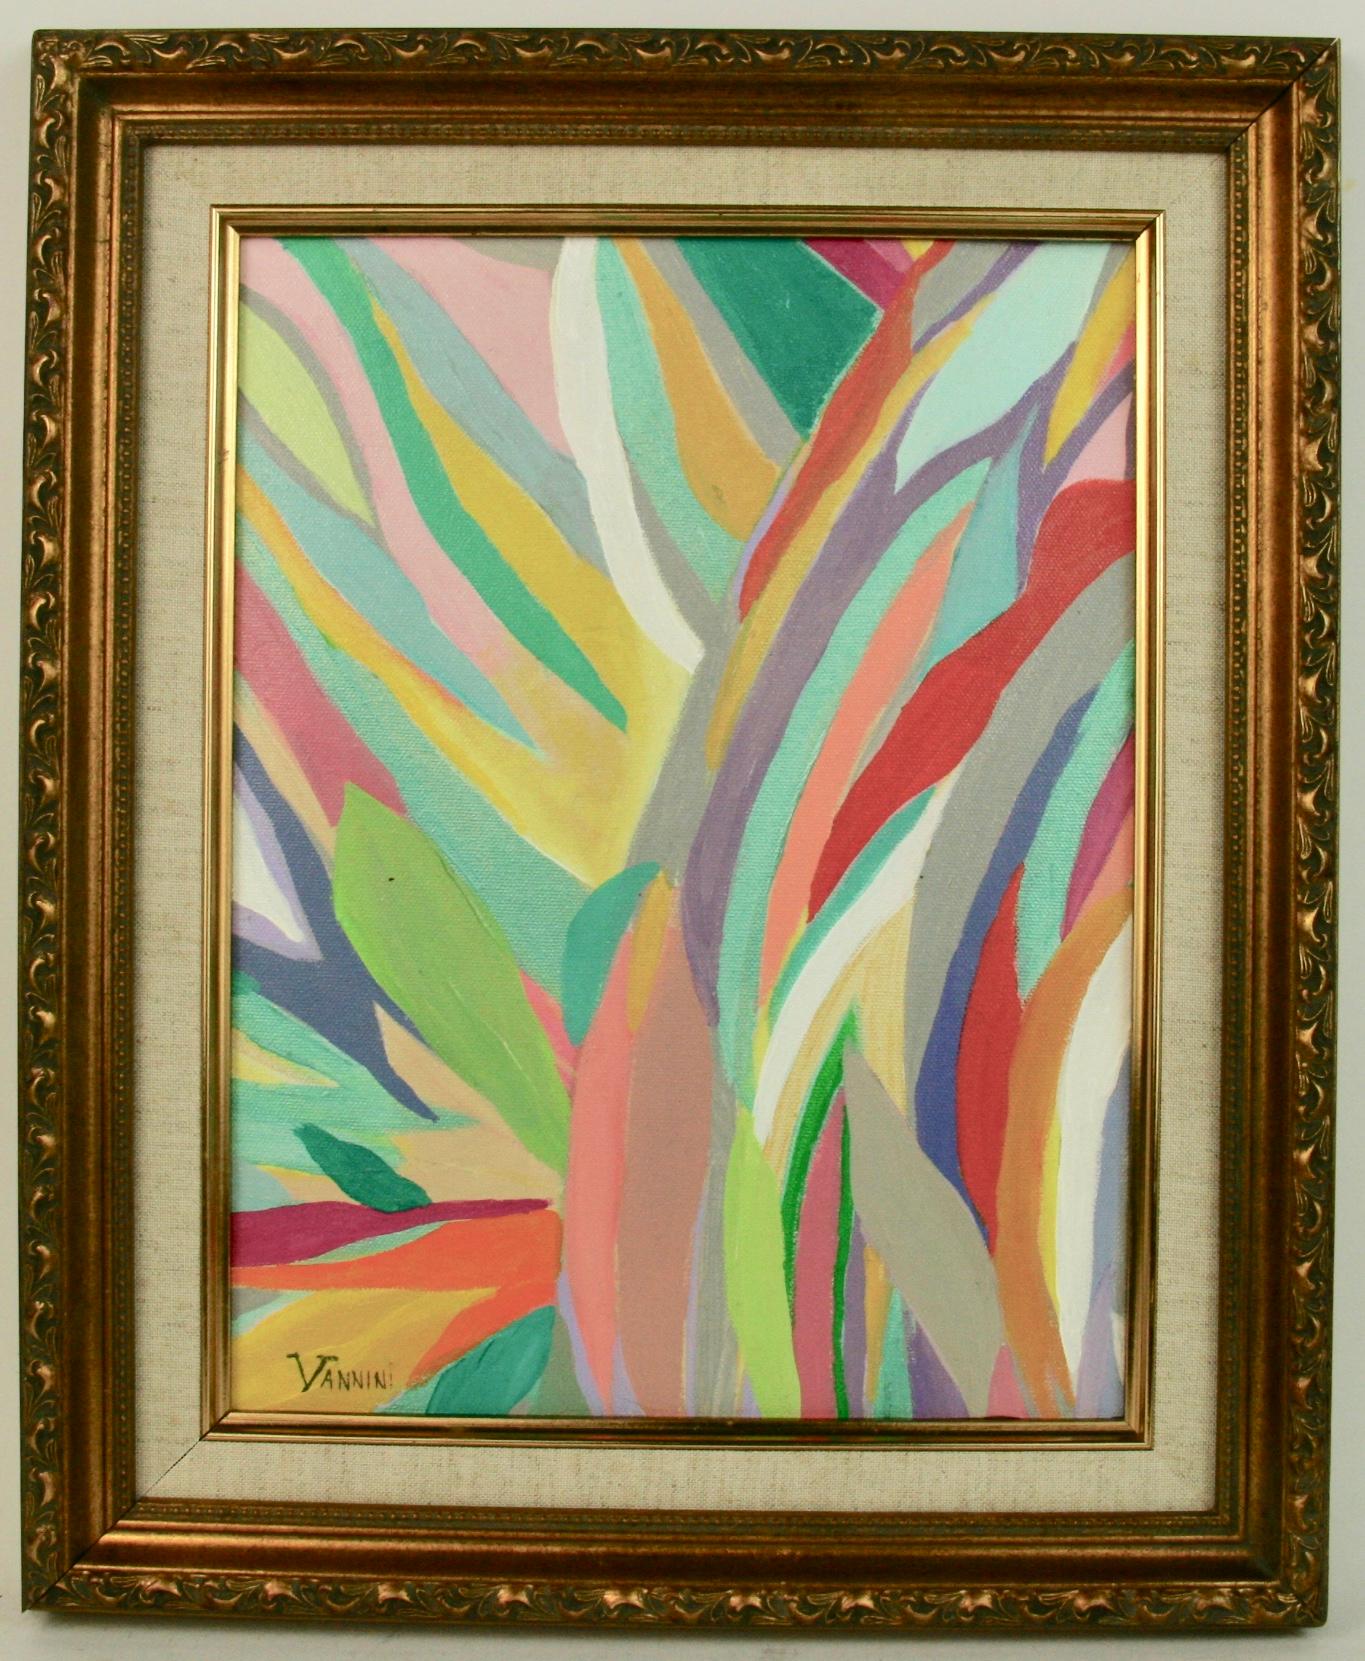 #5-3390 vintage acrylic on canvas applied to a board, displayed in a gilt-wood frame, signed by Vannini. Image size 13 H x 10 W